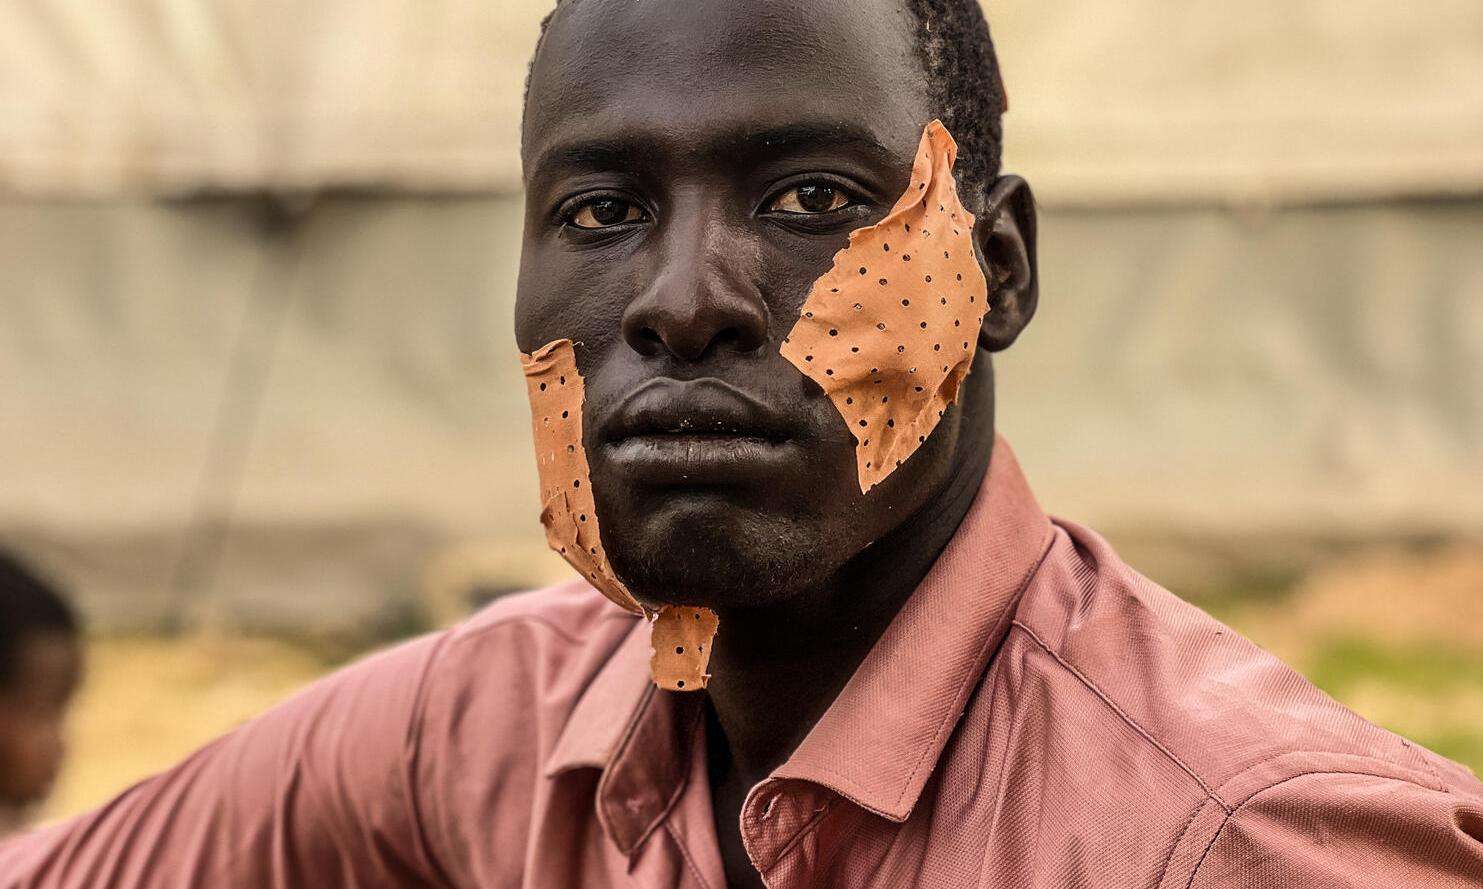 Young man from Sudan with bandaged wound on cheek after being treated by MSF aid workers in Chad